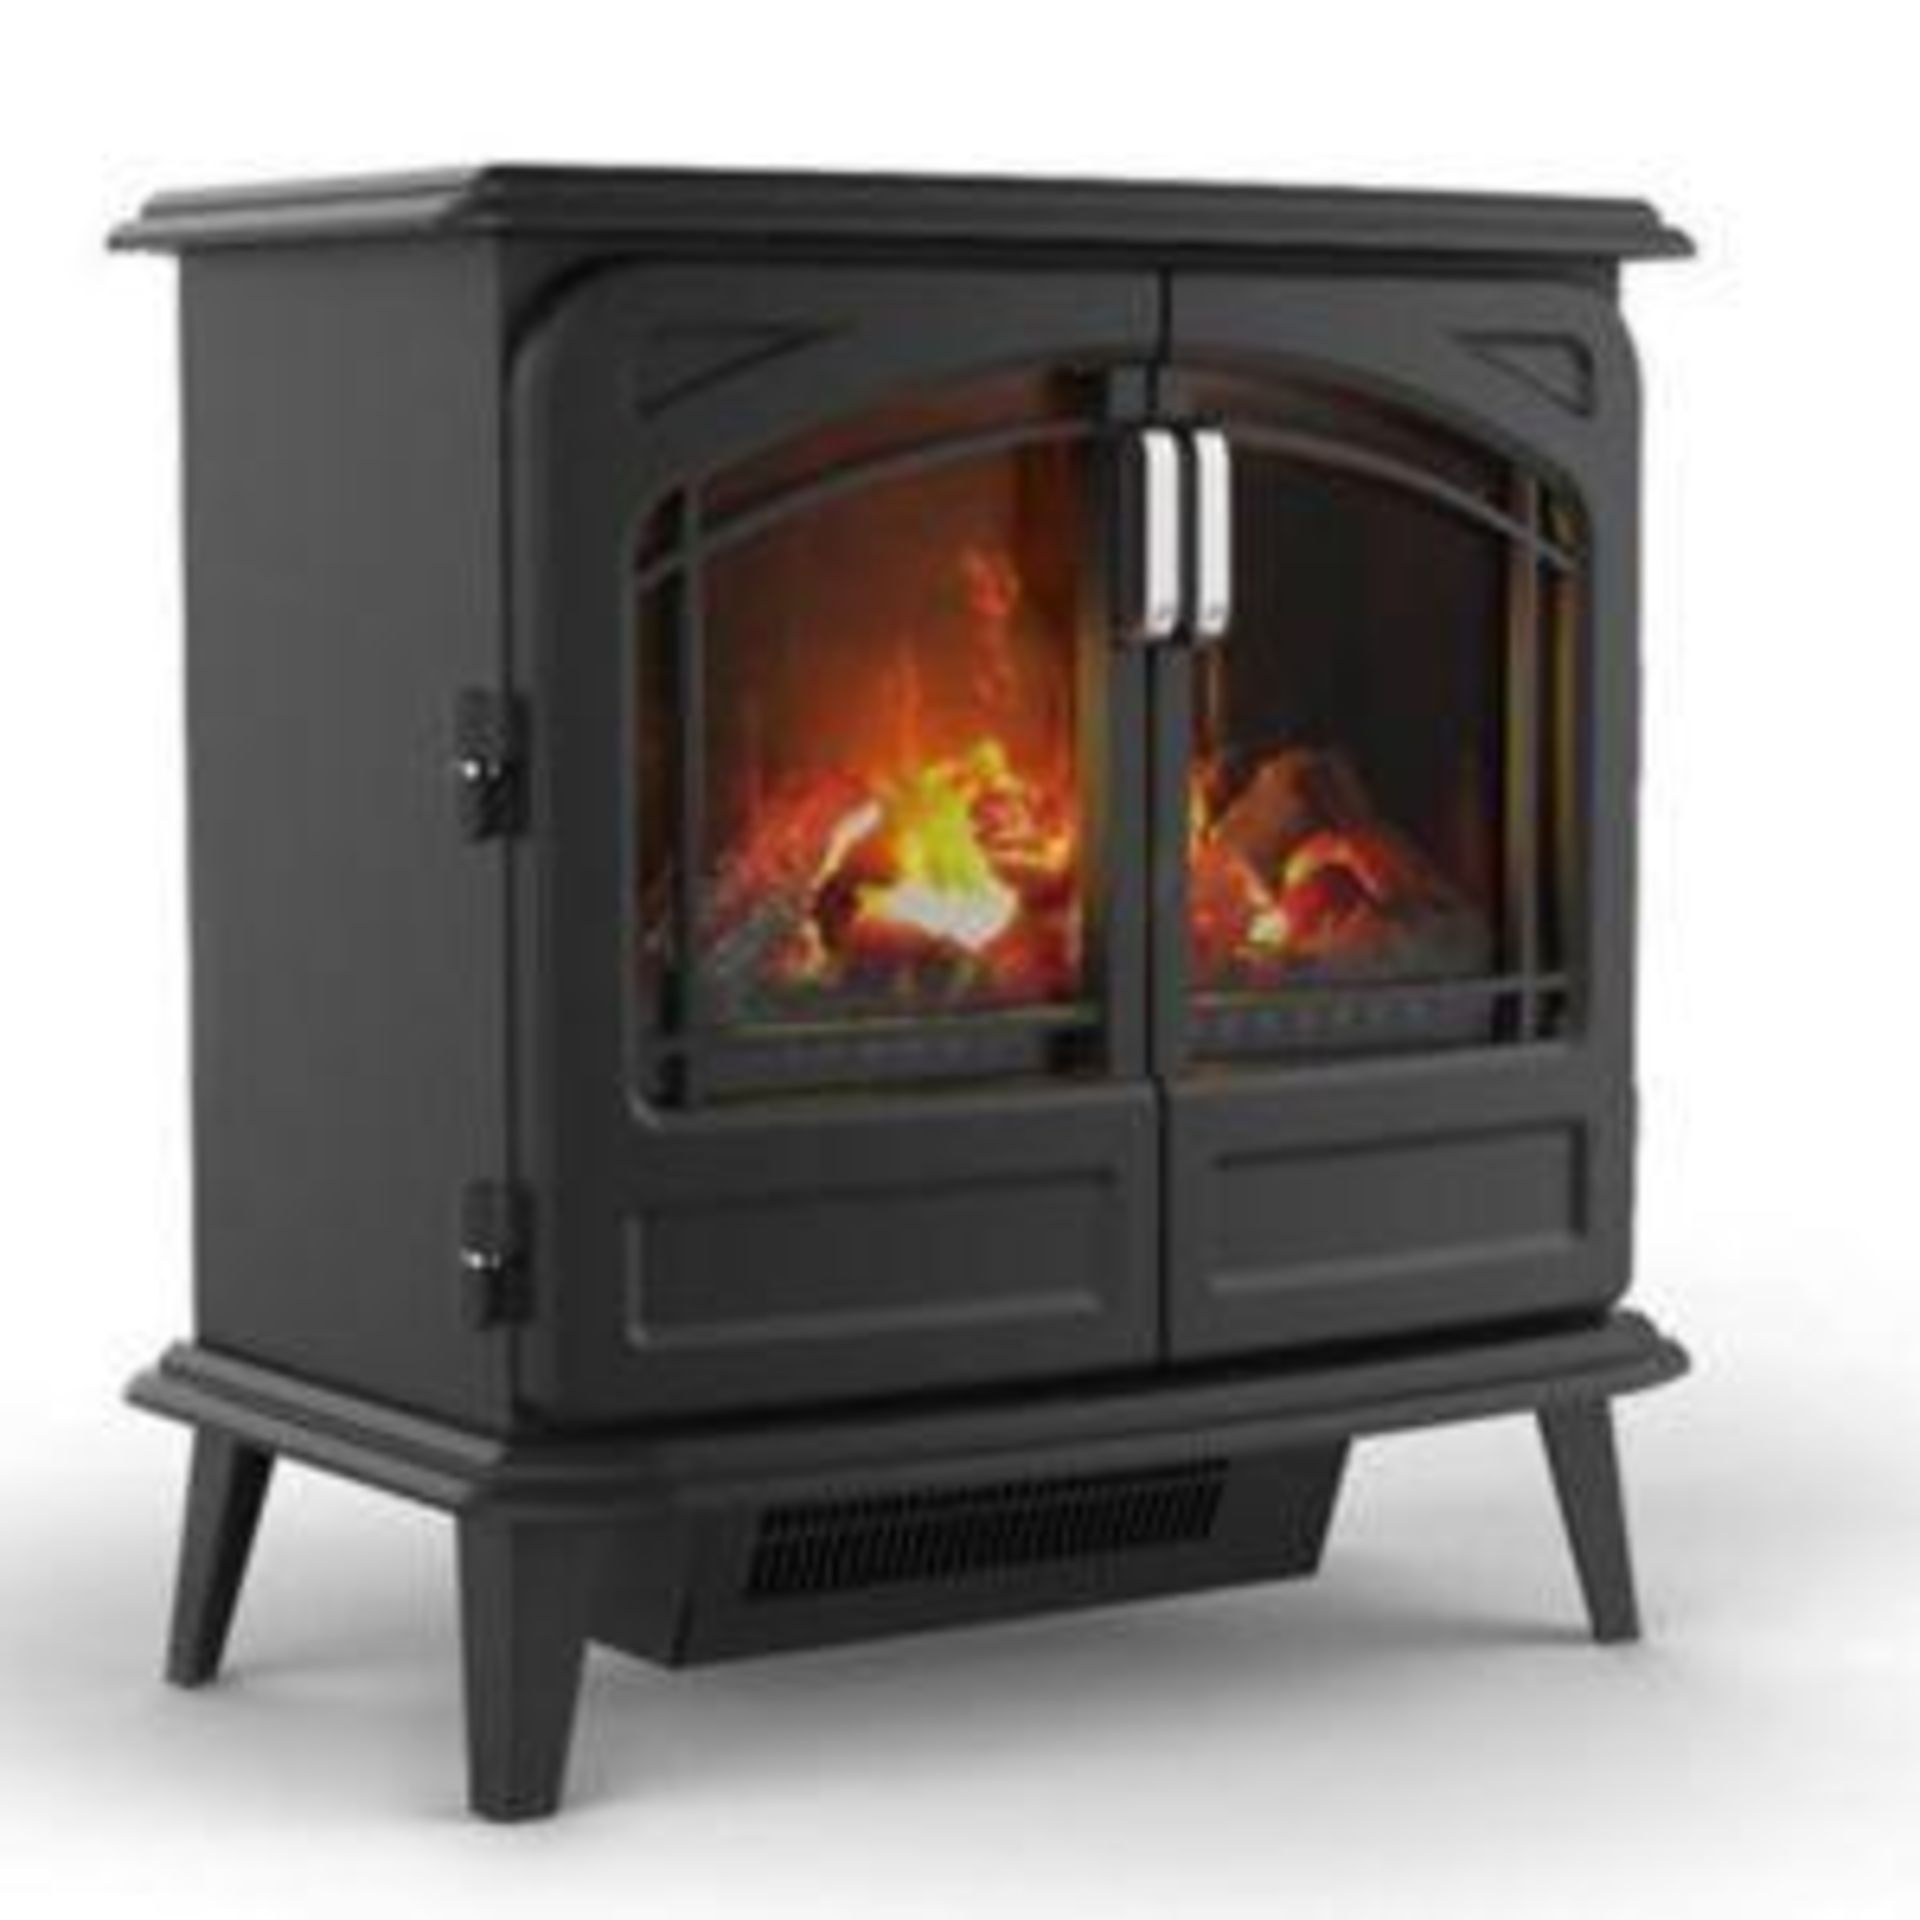 Dimplex Opti-Myst 2Kw Matt Black Electric Stove (LOCATION - H/S 4.2.2) This electric fire features